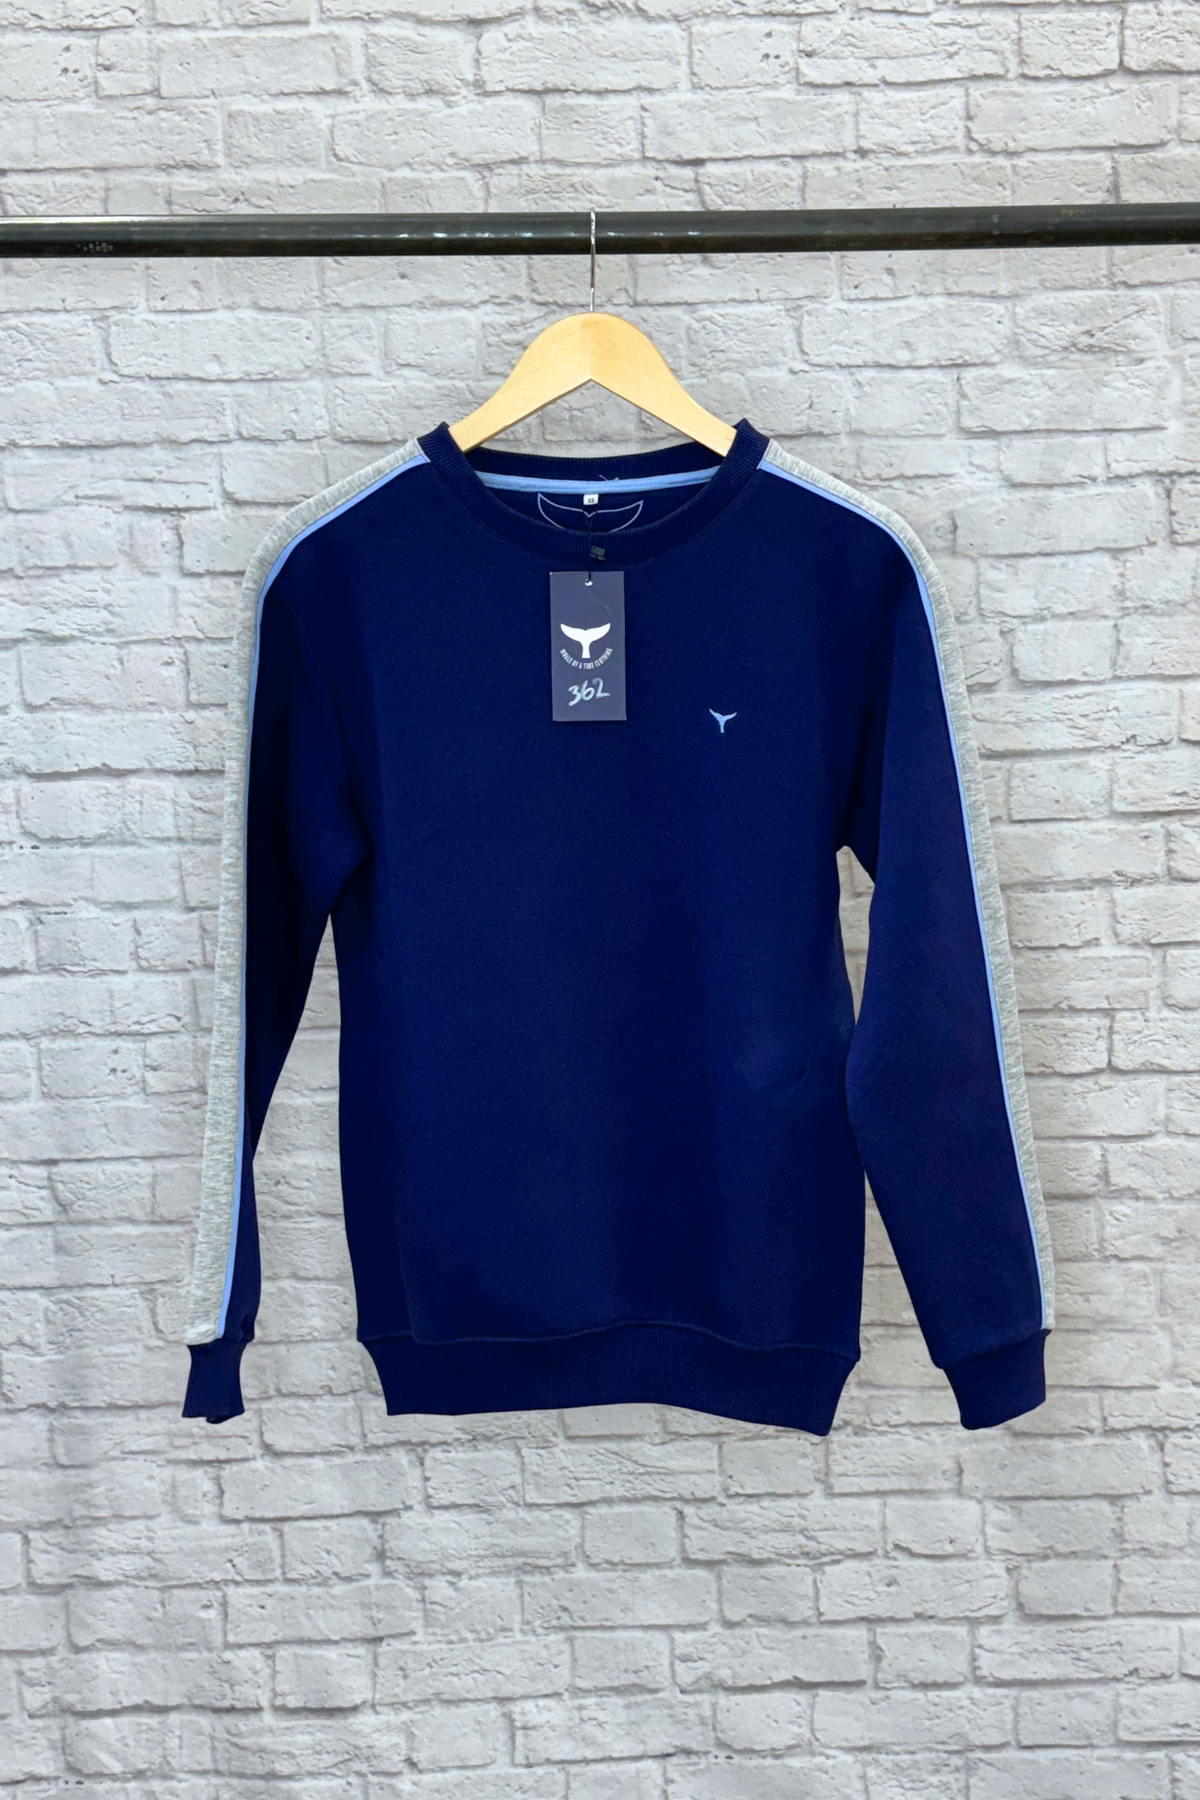 S&S Salthouse Unisex Sweatshirt - Navy XS (362) - Whale Of A Time Clothing